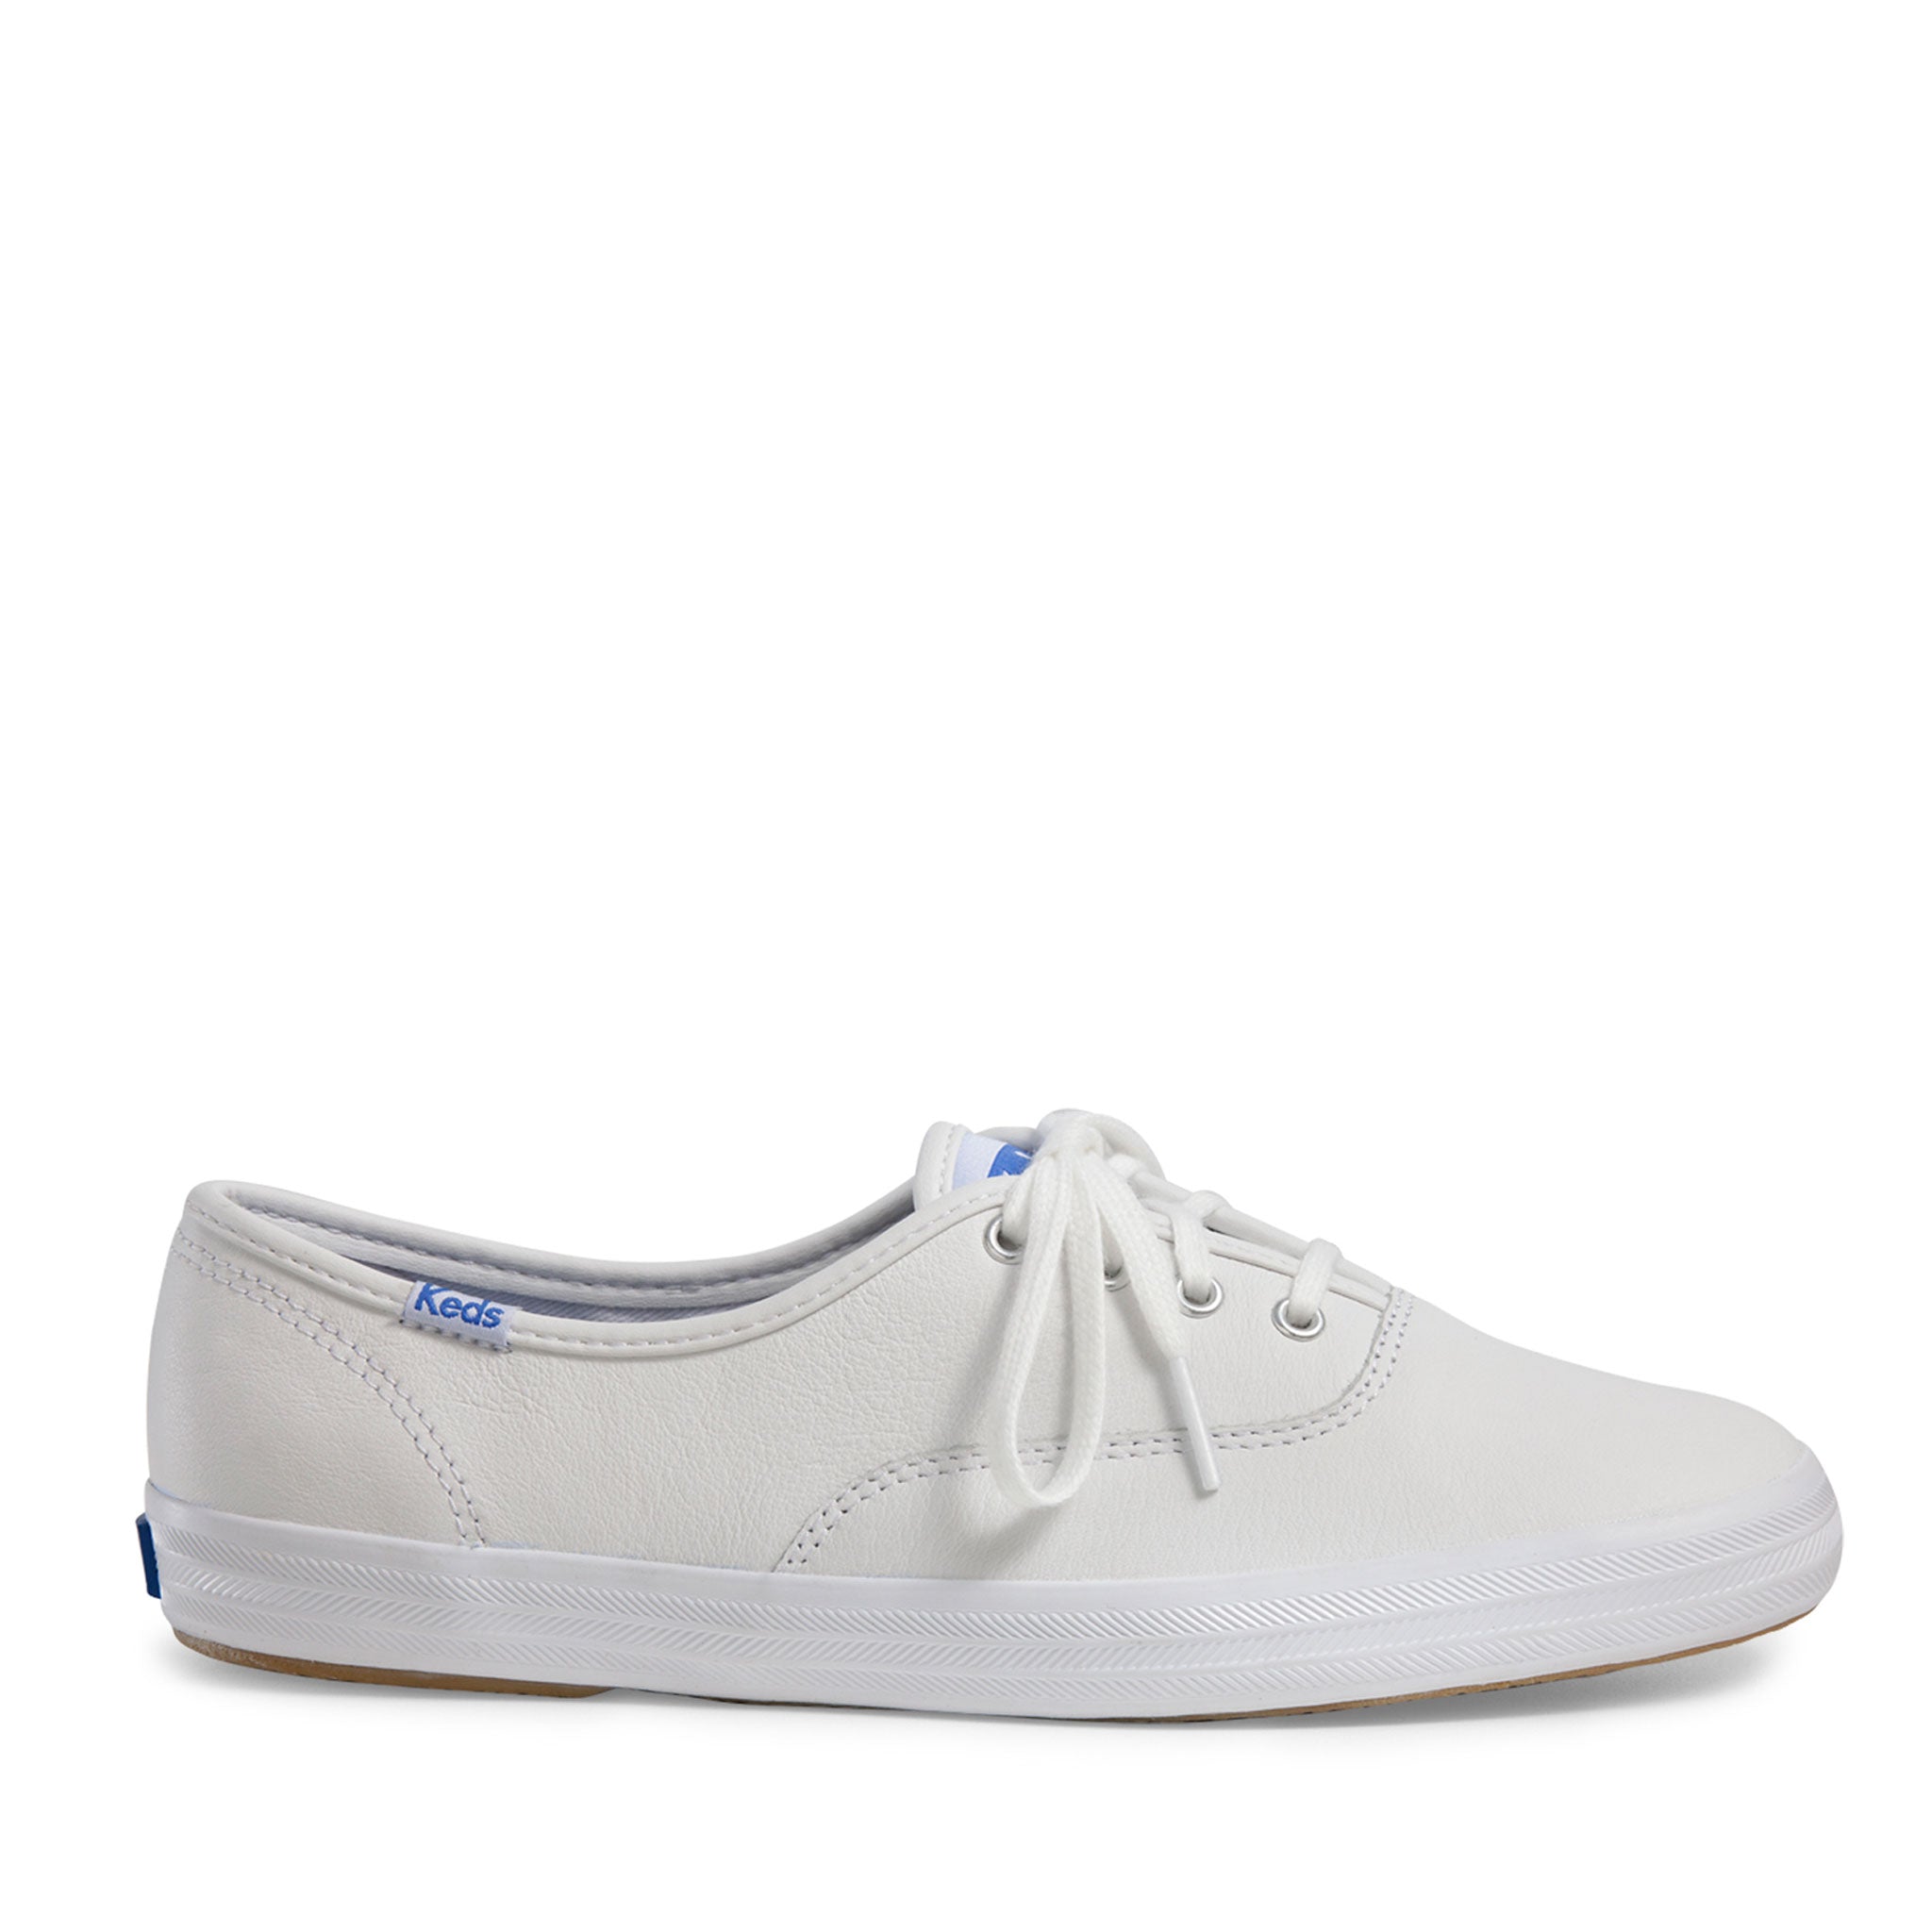 Keds Women's Champion Leather Oxford Shoe in White